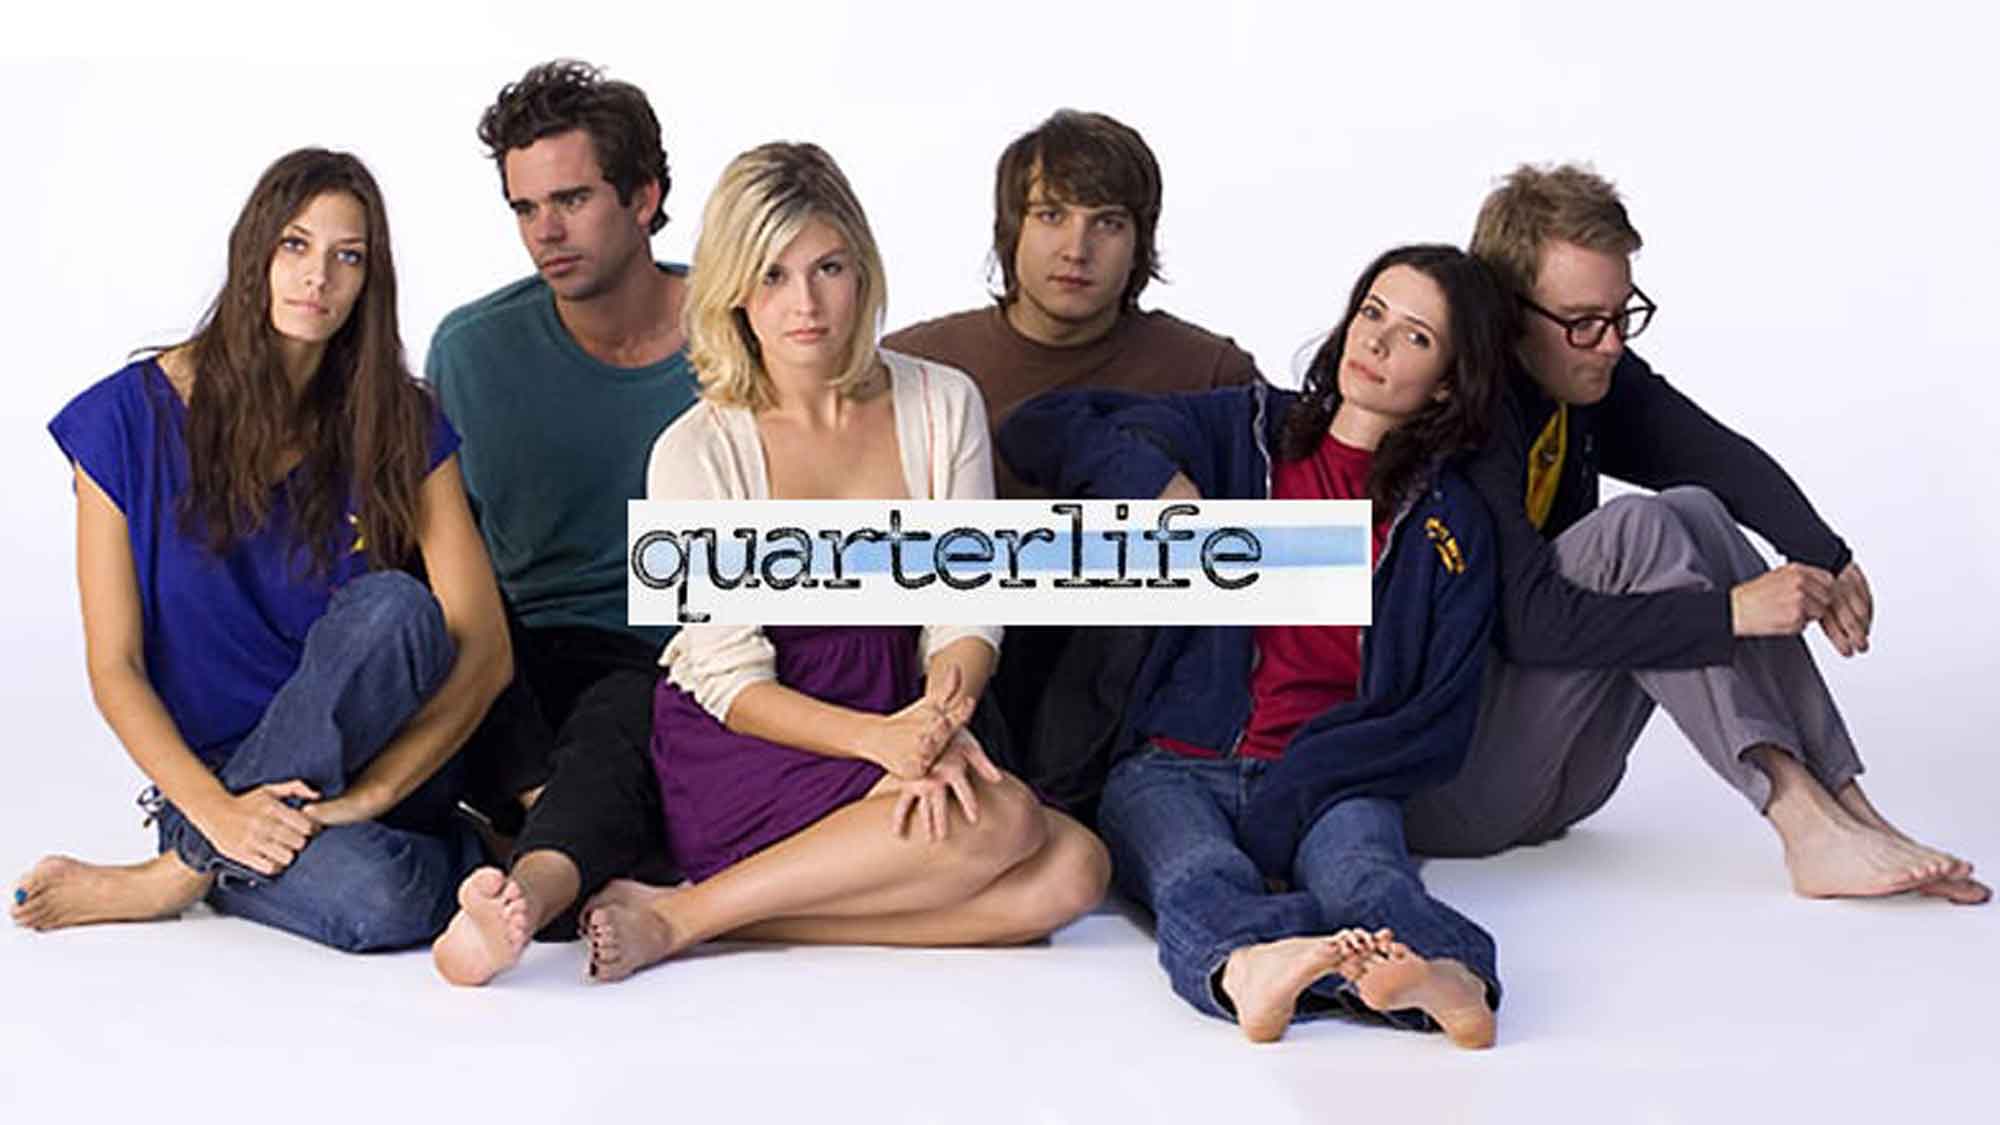 Quarterlife Web Series Gets Picked Up For Primetime TV By NBC